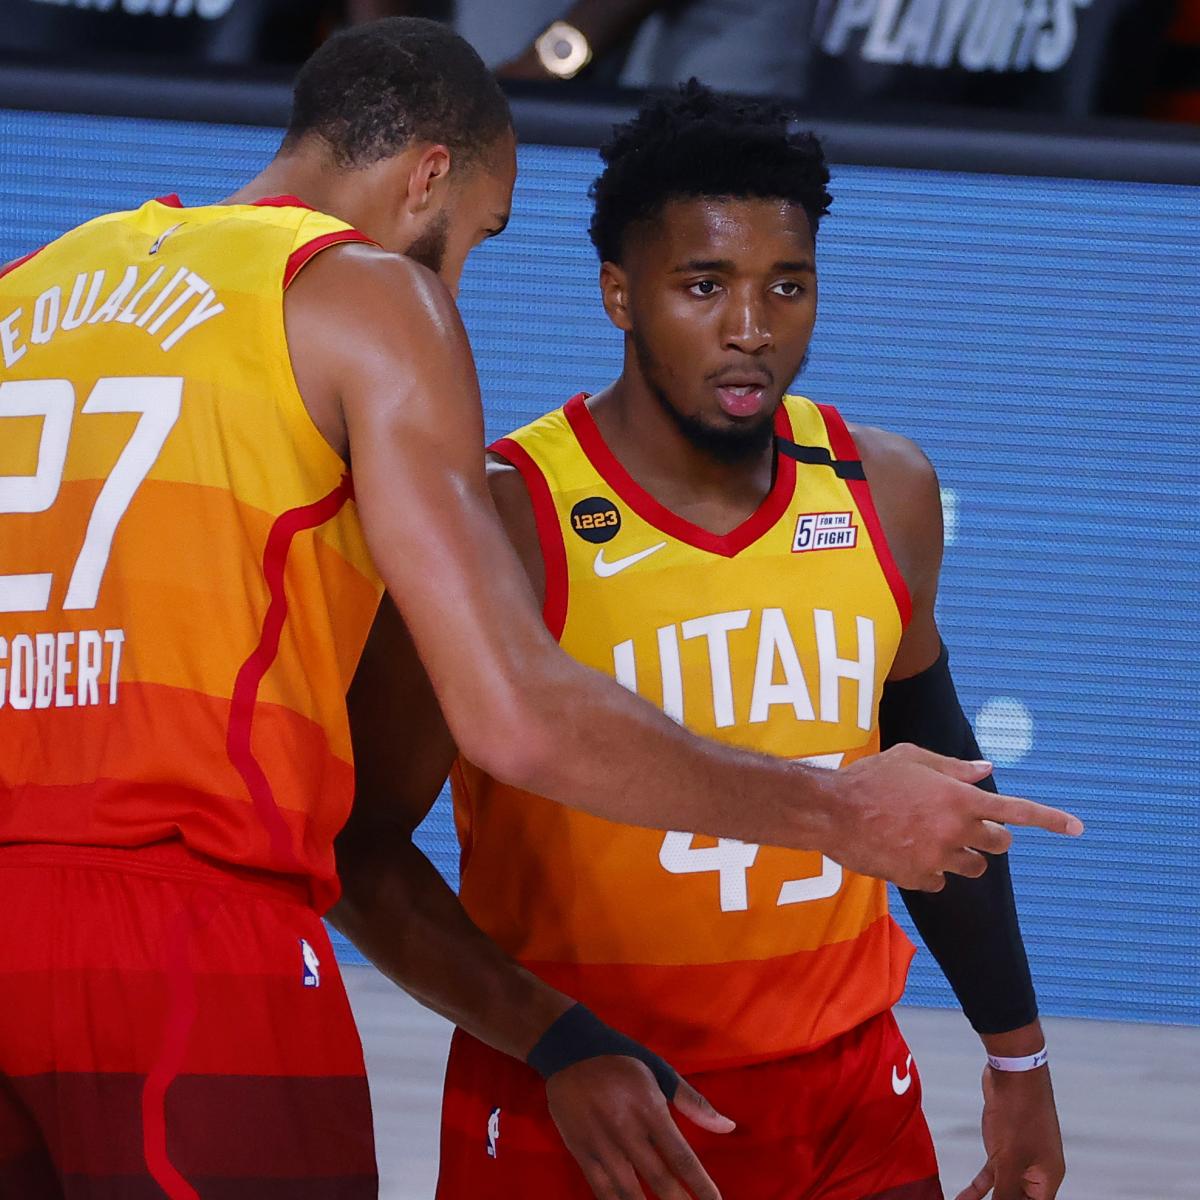 Donovan Mitchell Scores 51 to Outduel Jamal Murray as Jazz Defeat Nuggets